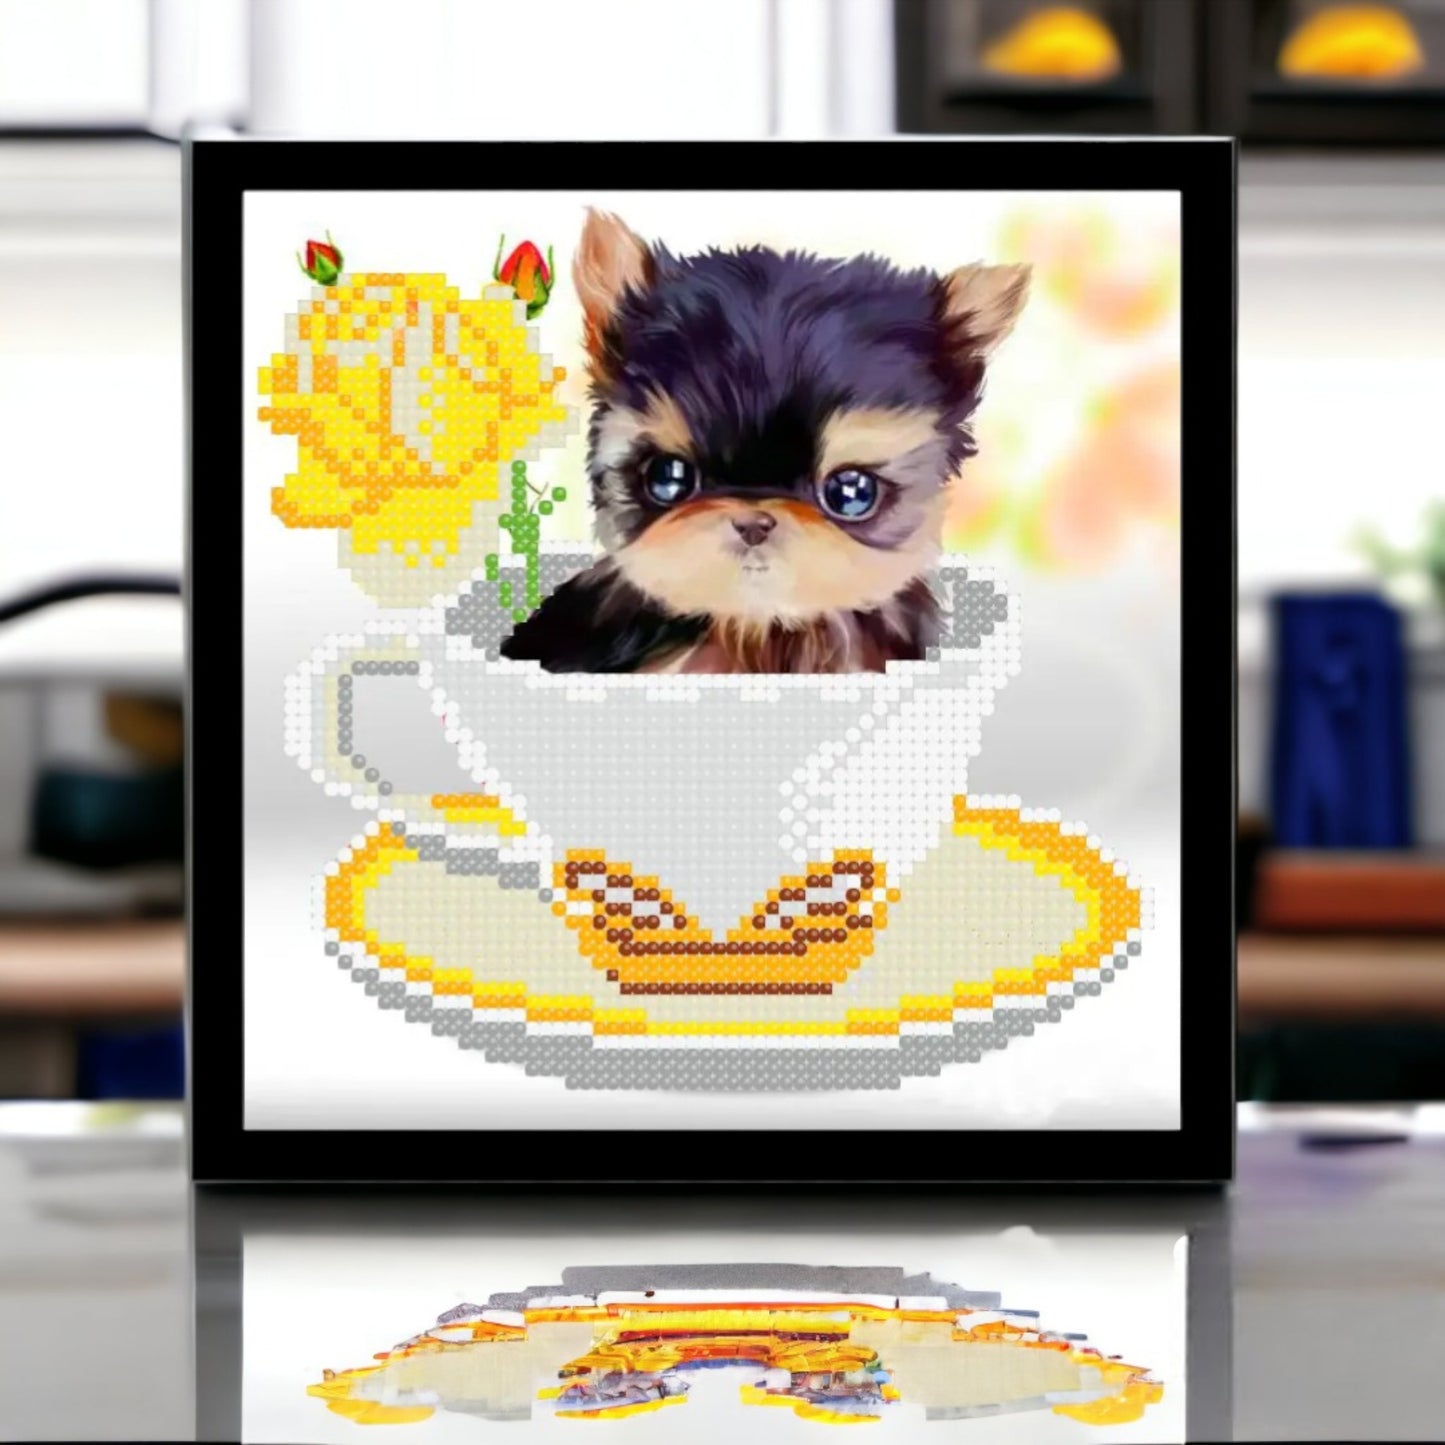 DIY Bead embroidery kit  "Puppy in a cup". Size: 6.3 - 6.7 in (16 - 17cm) - VadymShop